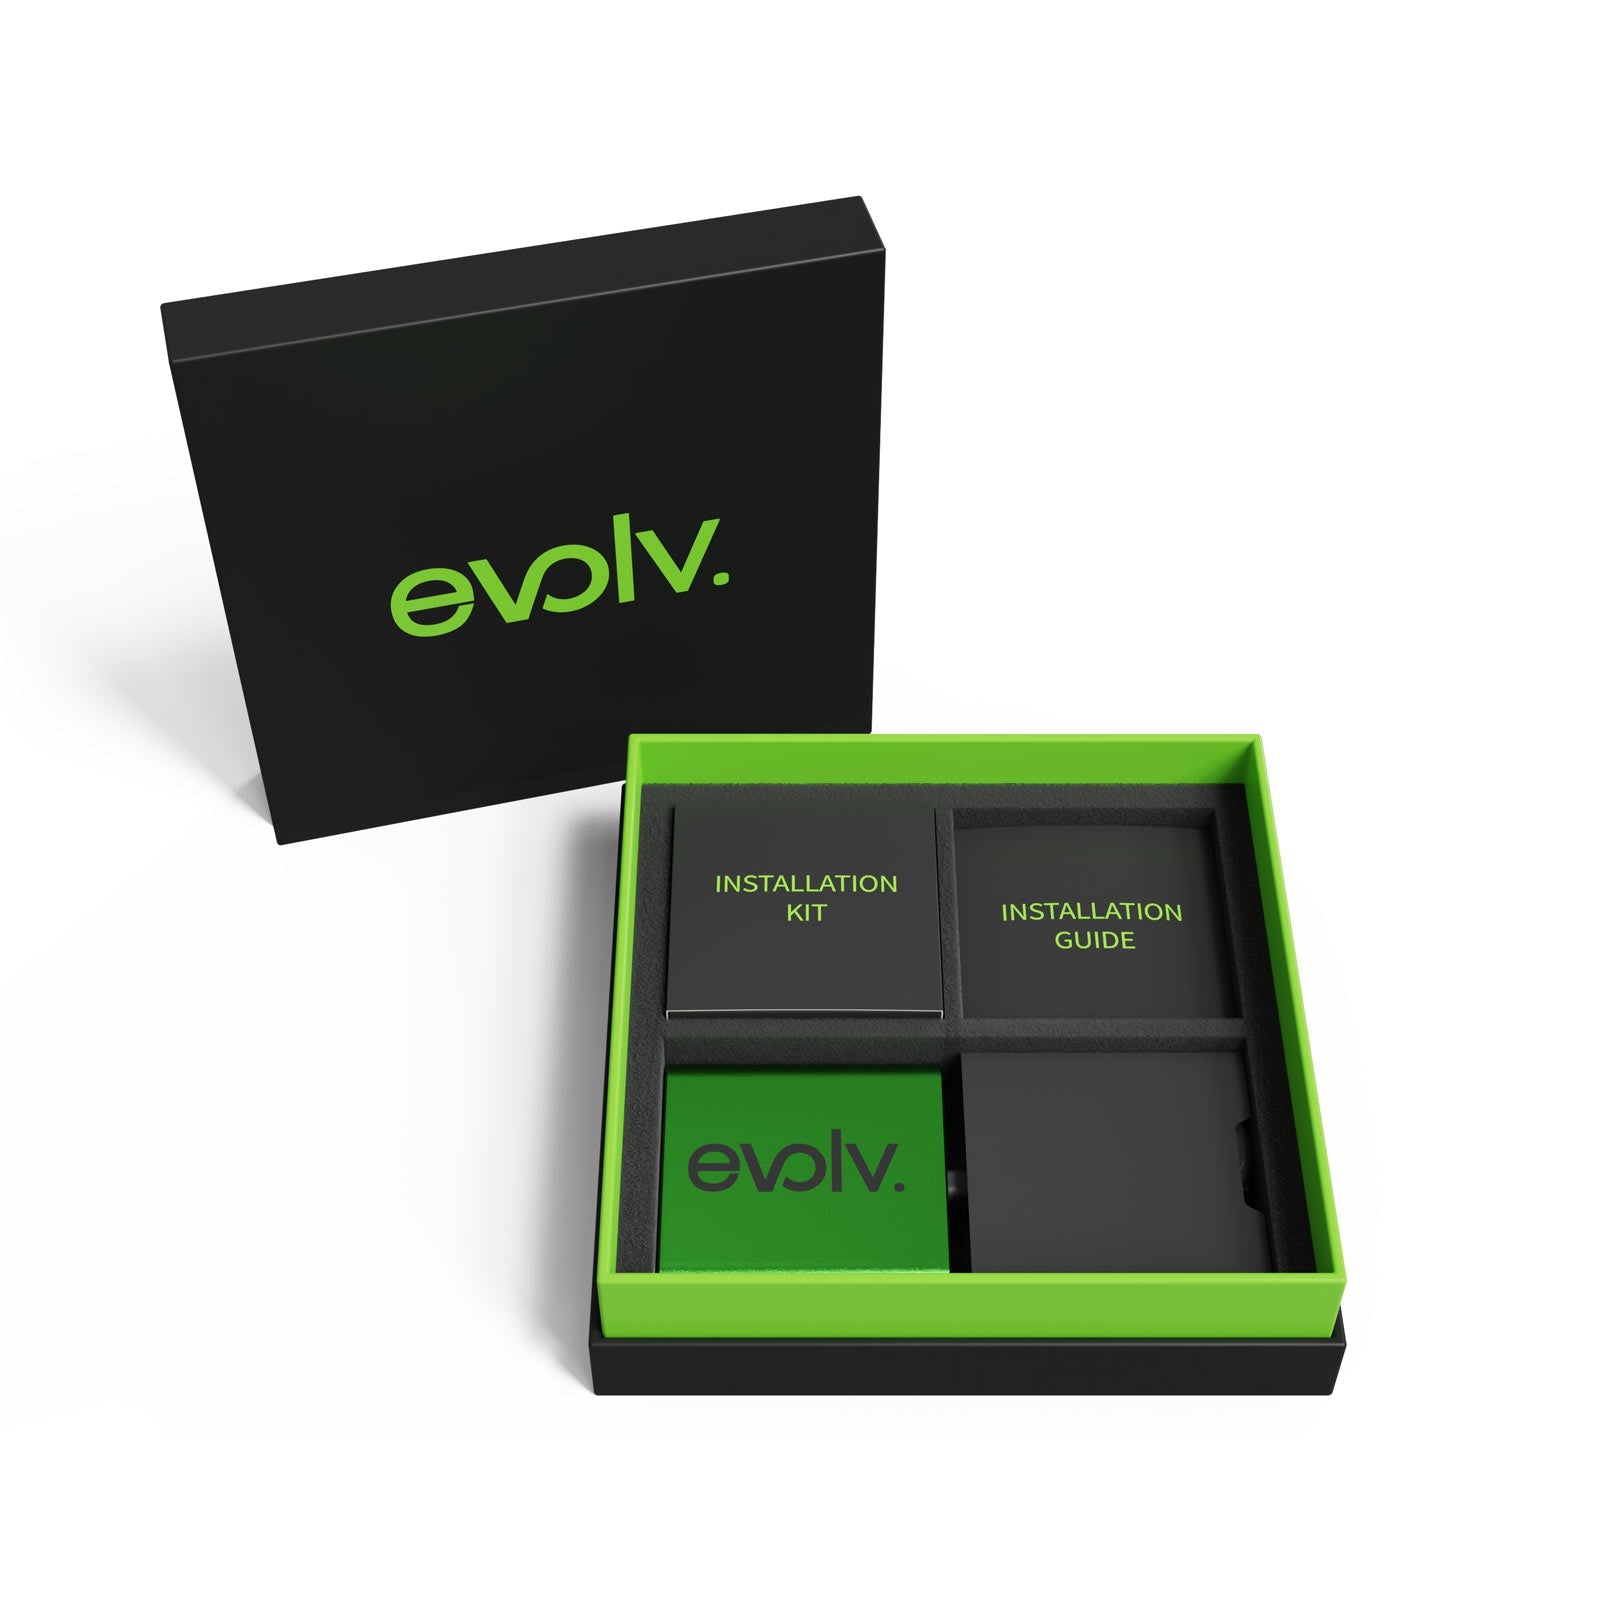 Increase your fuel mileage, performance and throttle response with an Evolv Kia K5 Performance Chip!